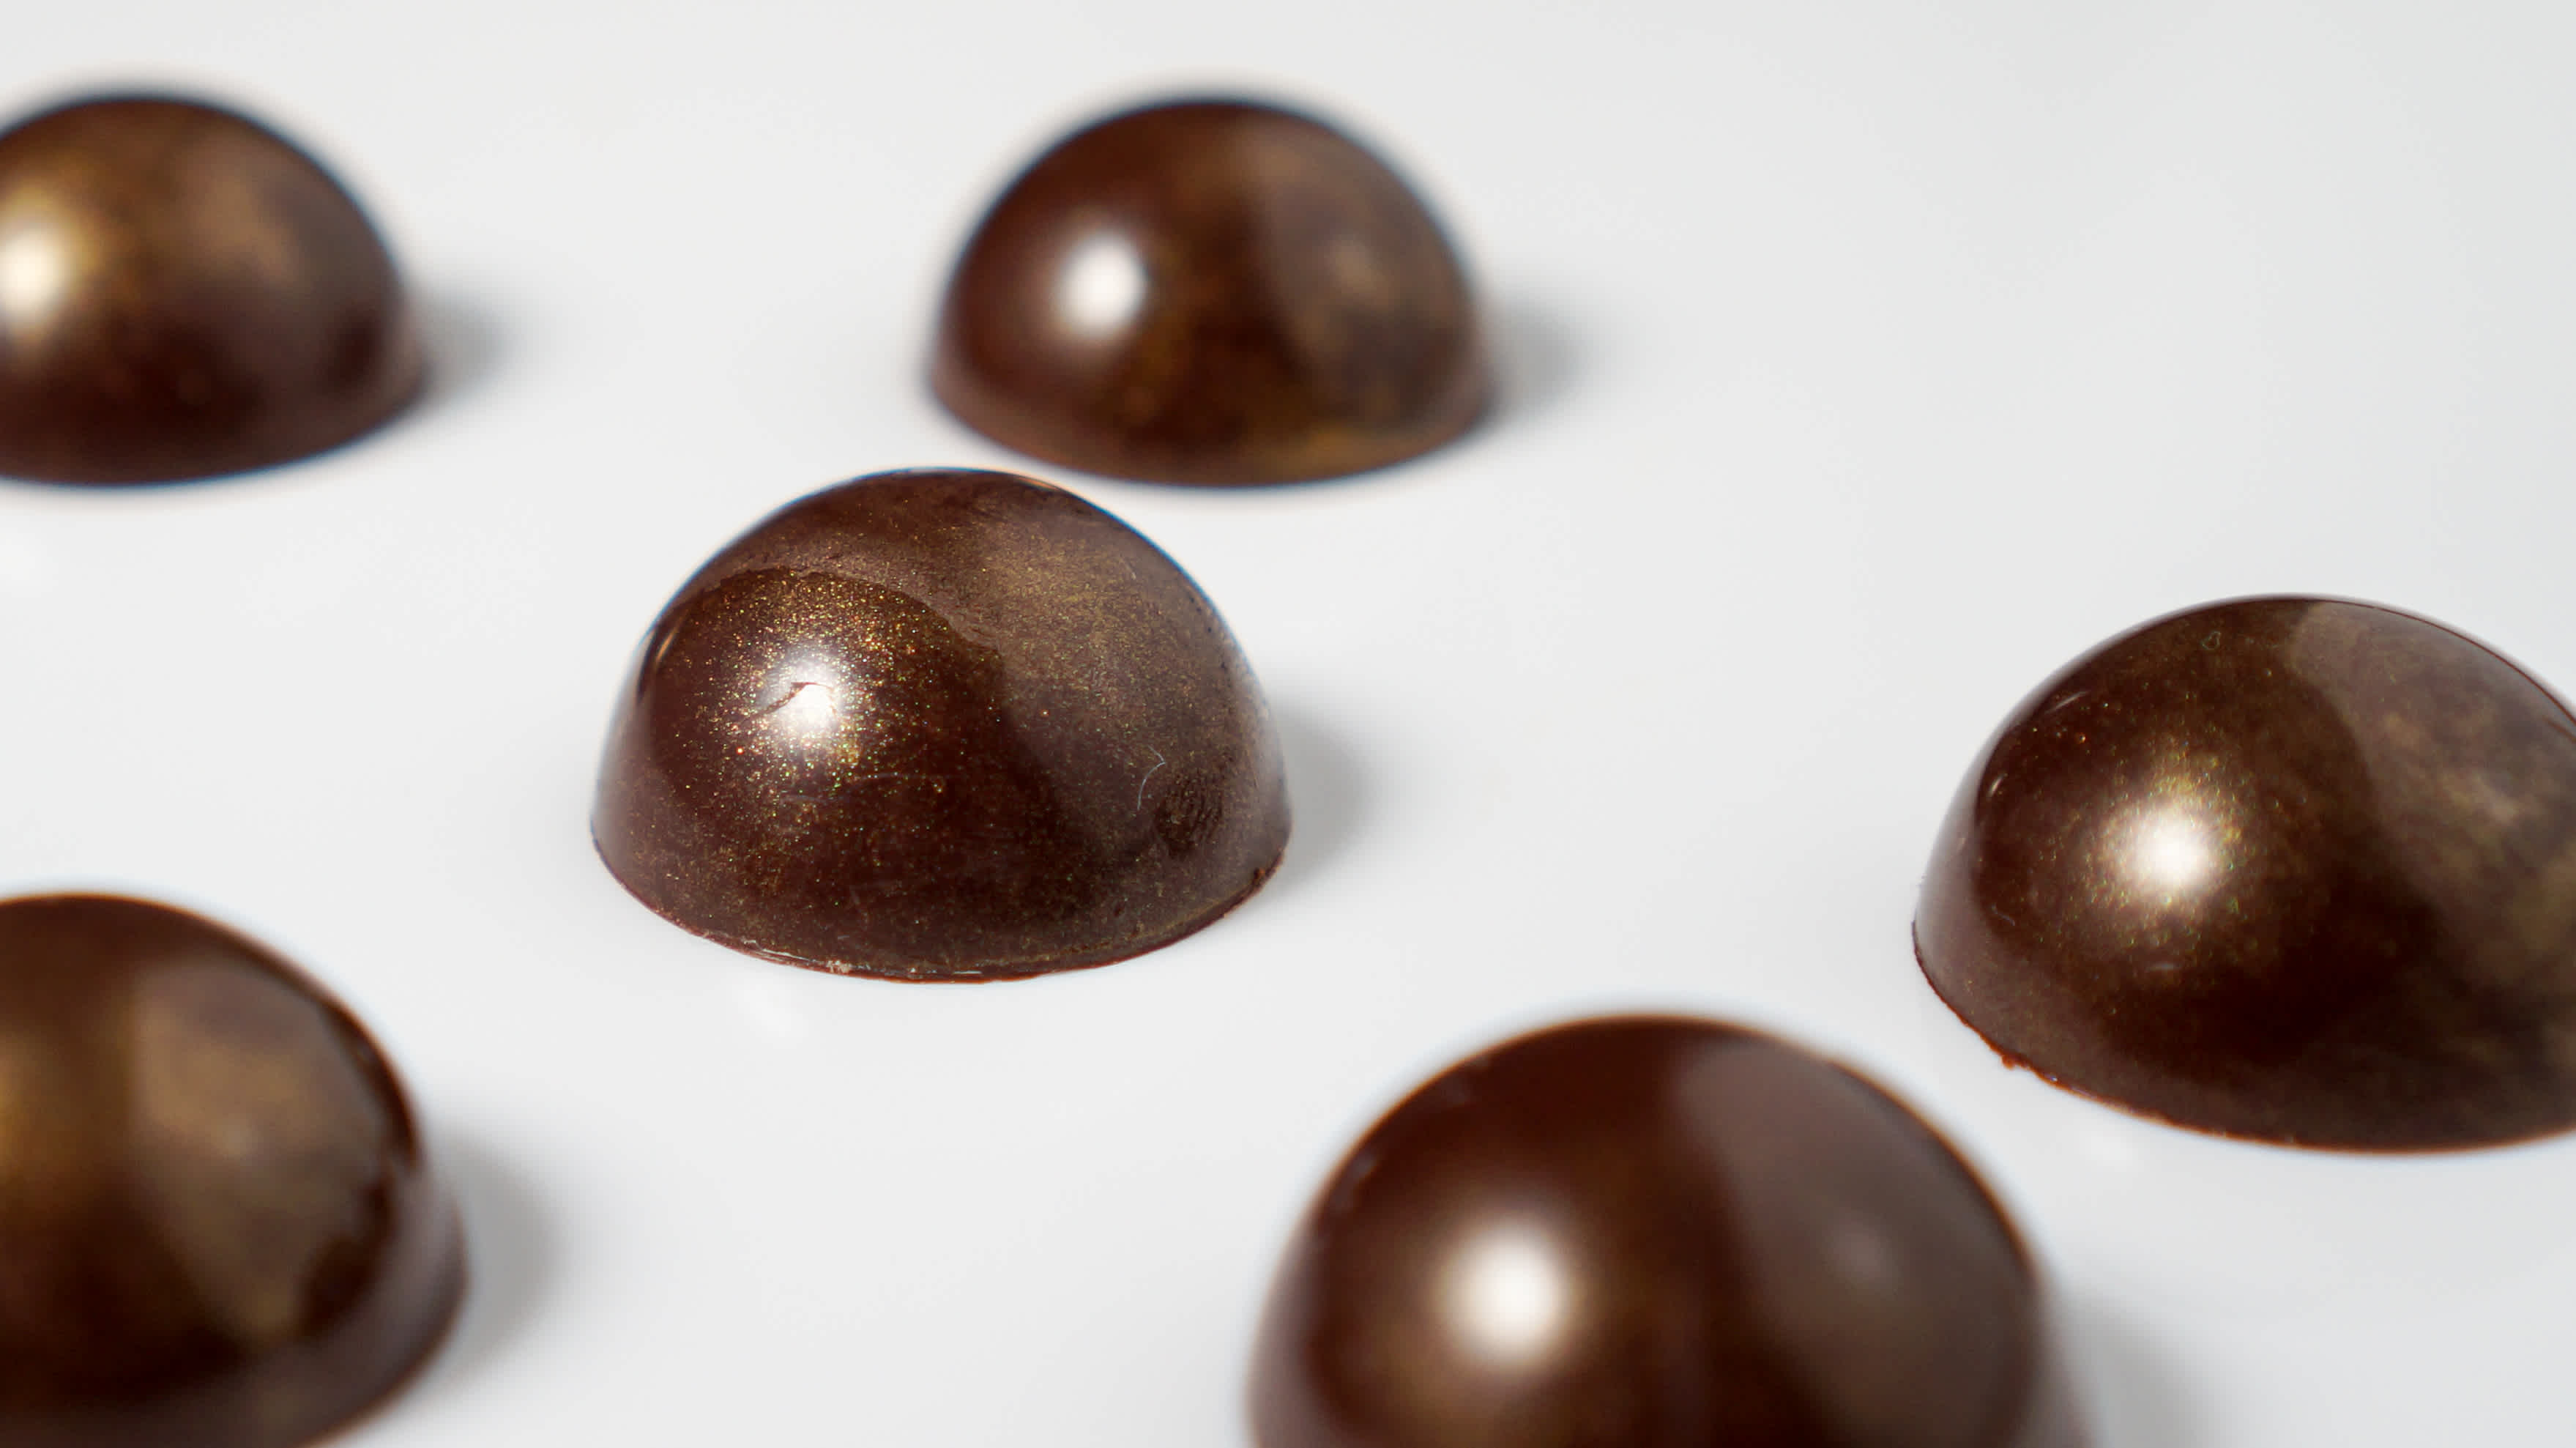 30 tips to PERFECTING chocolate bonbons at home - A detailed guide